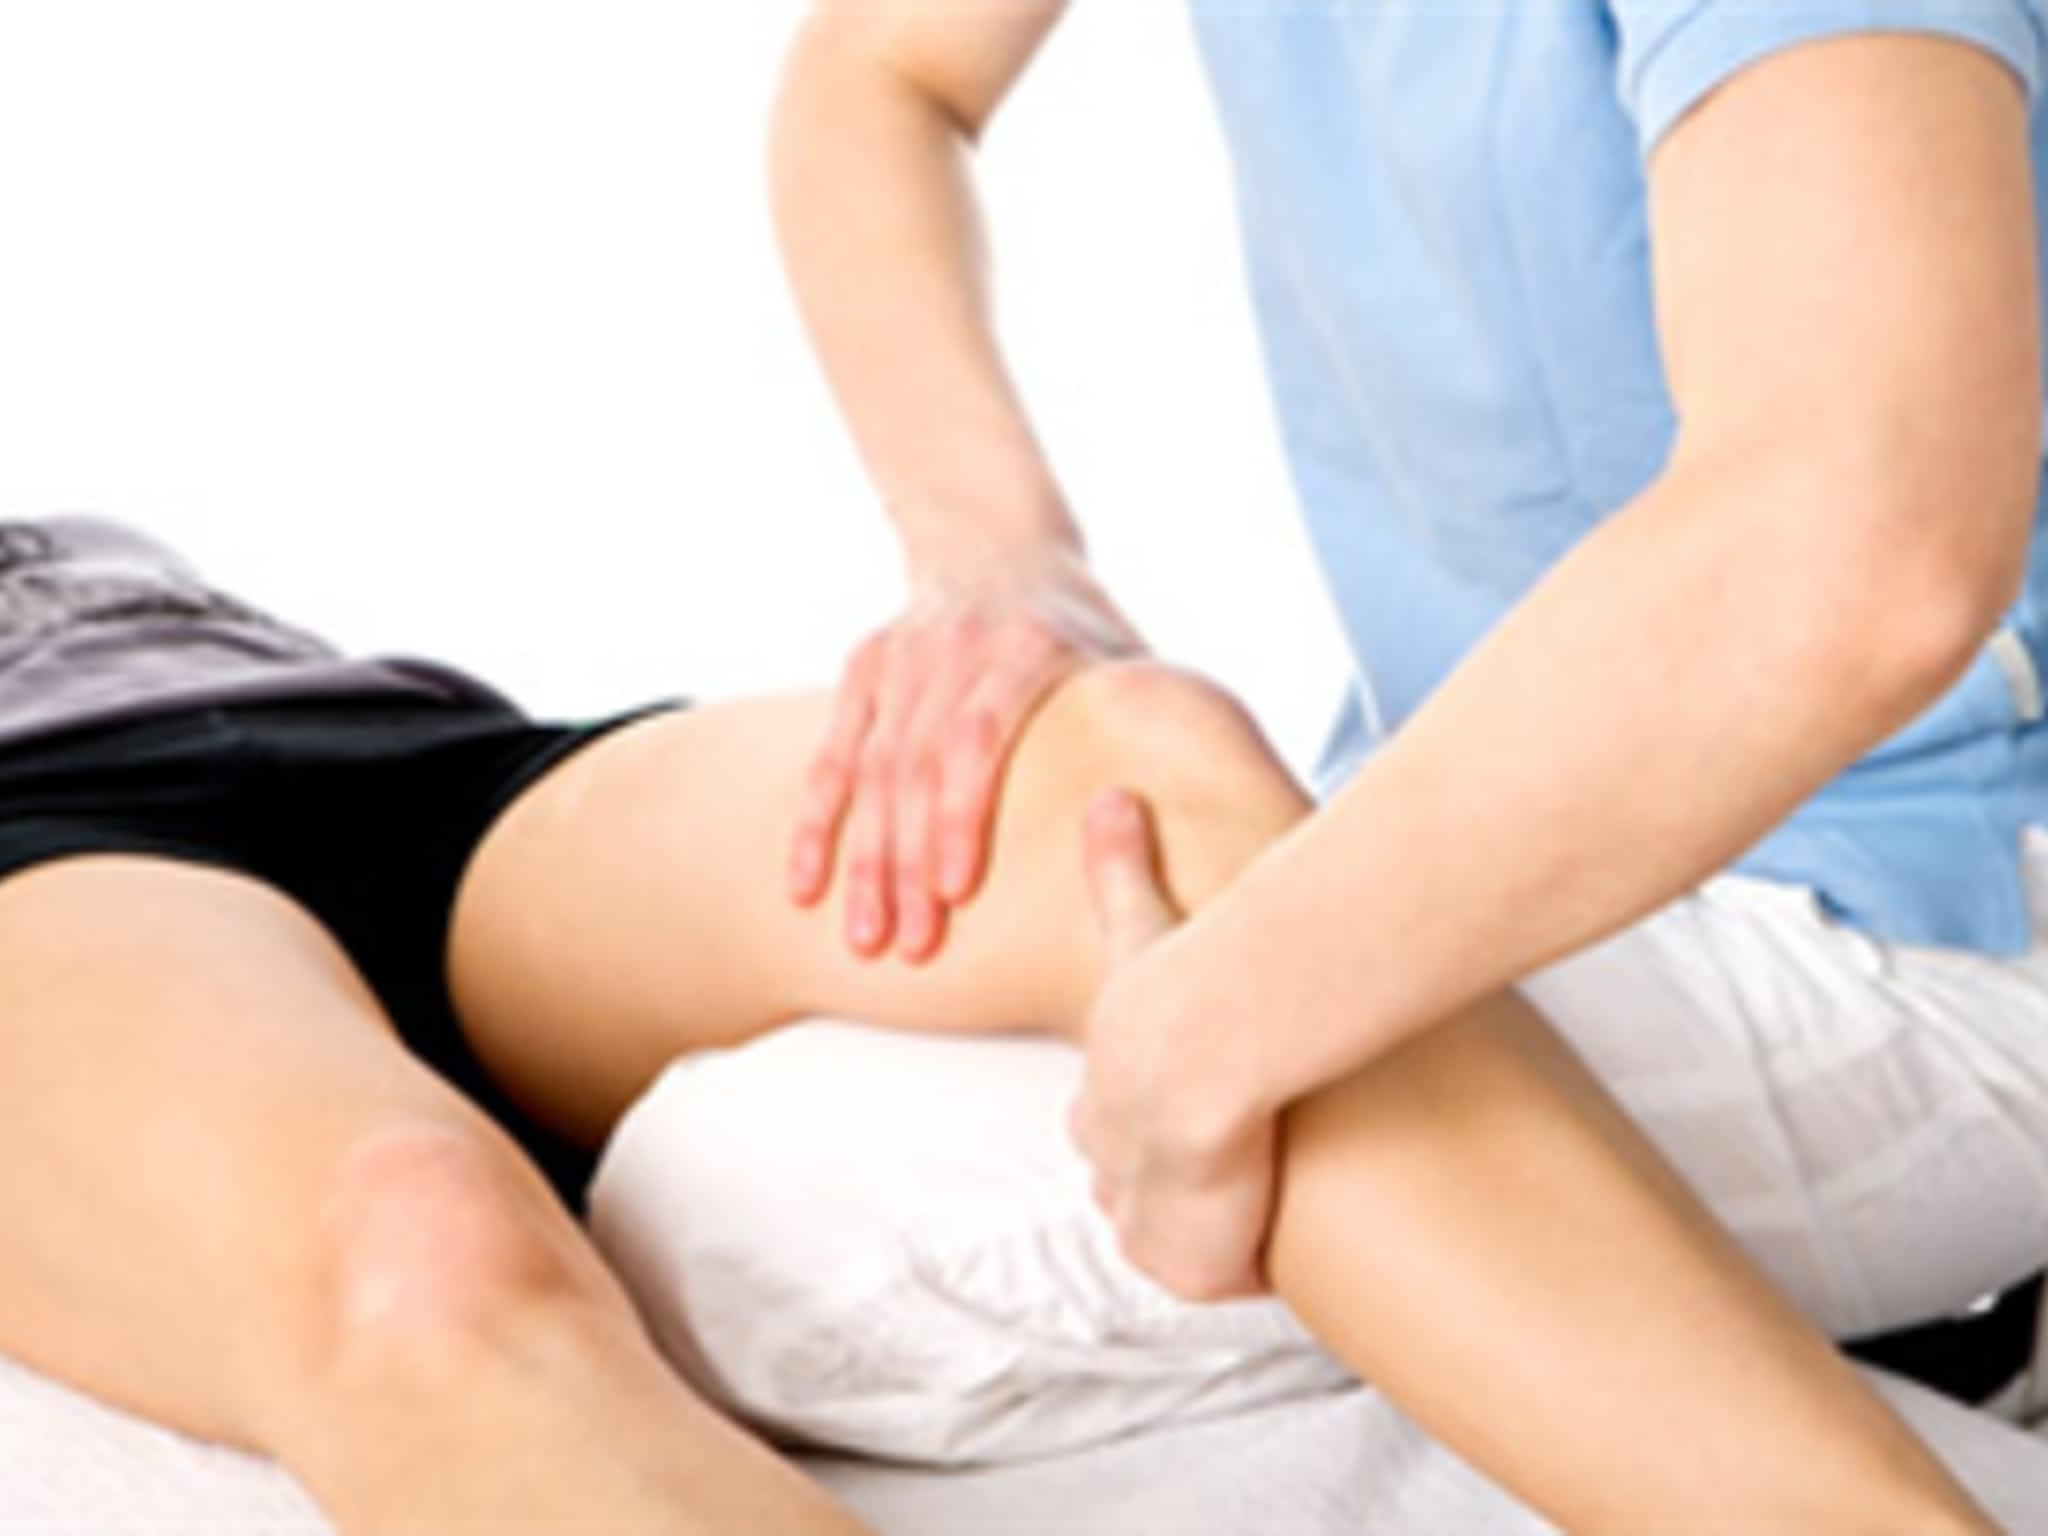 photo Whyte Ridge Physical Therapy And Sports Injury Clinic